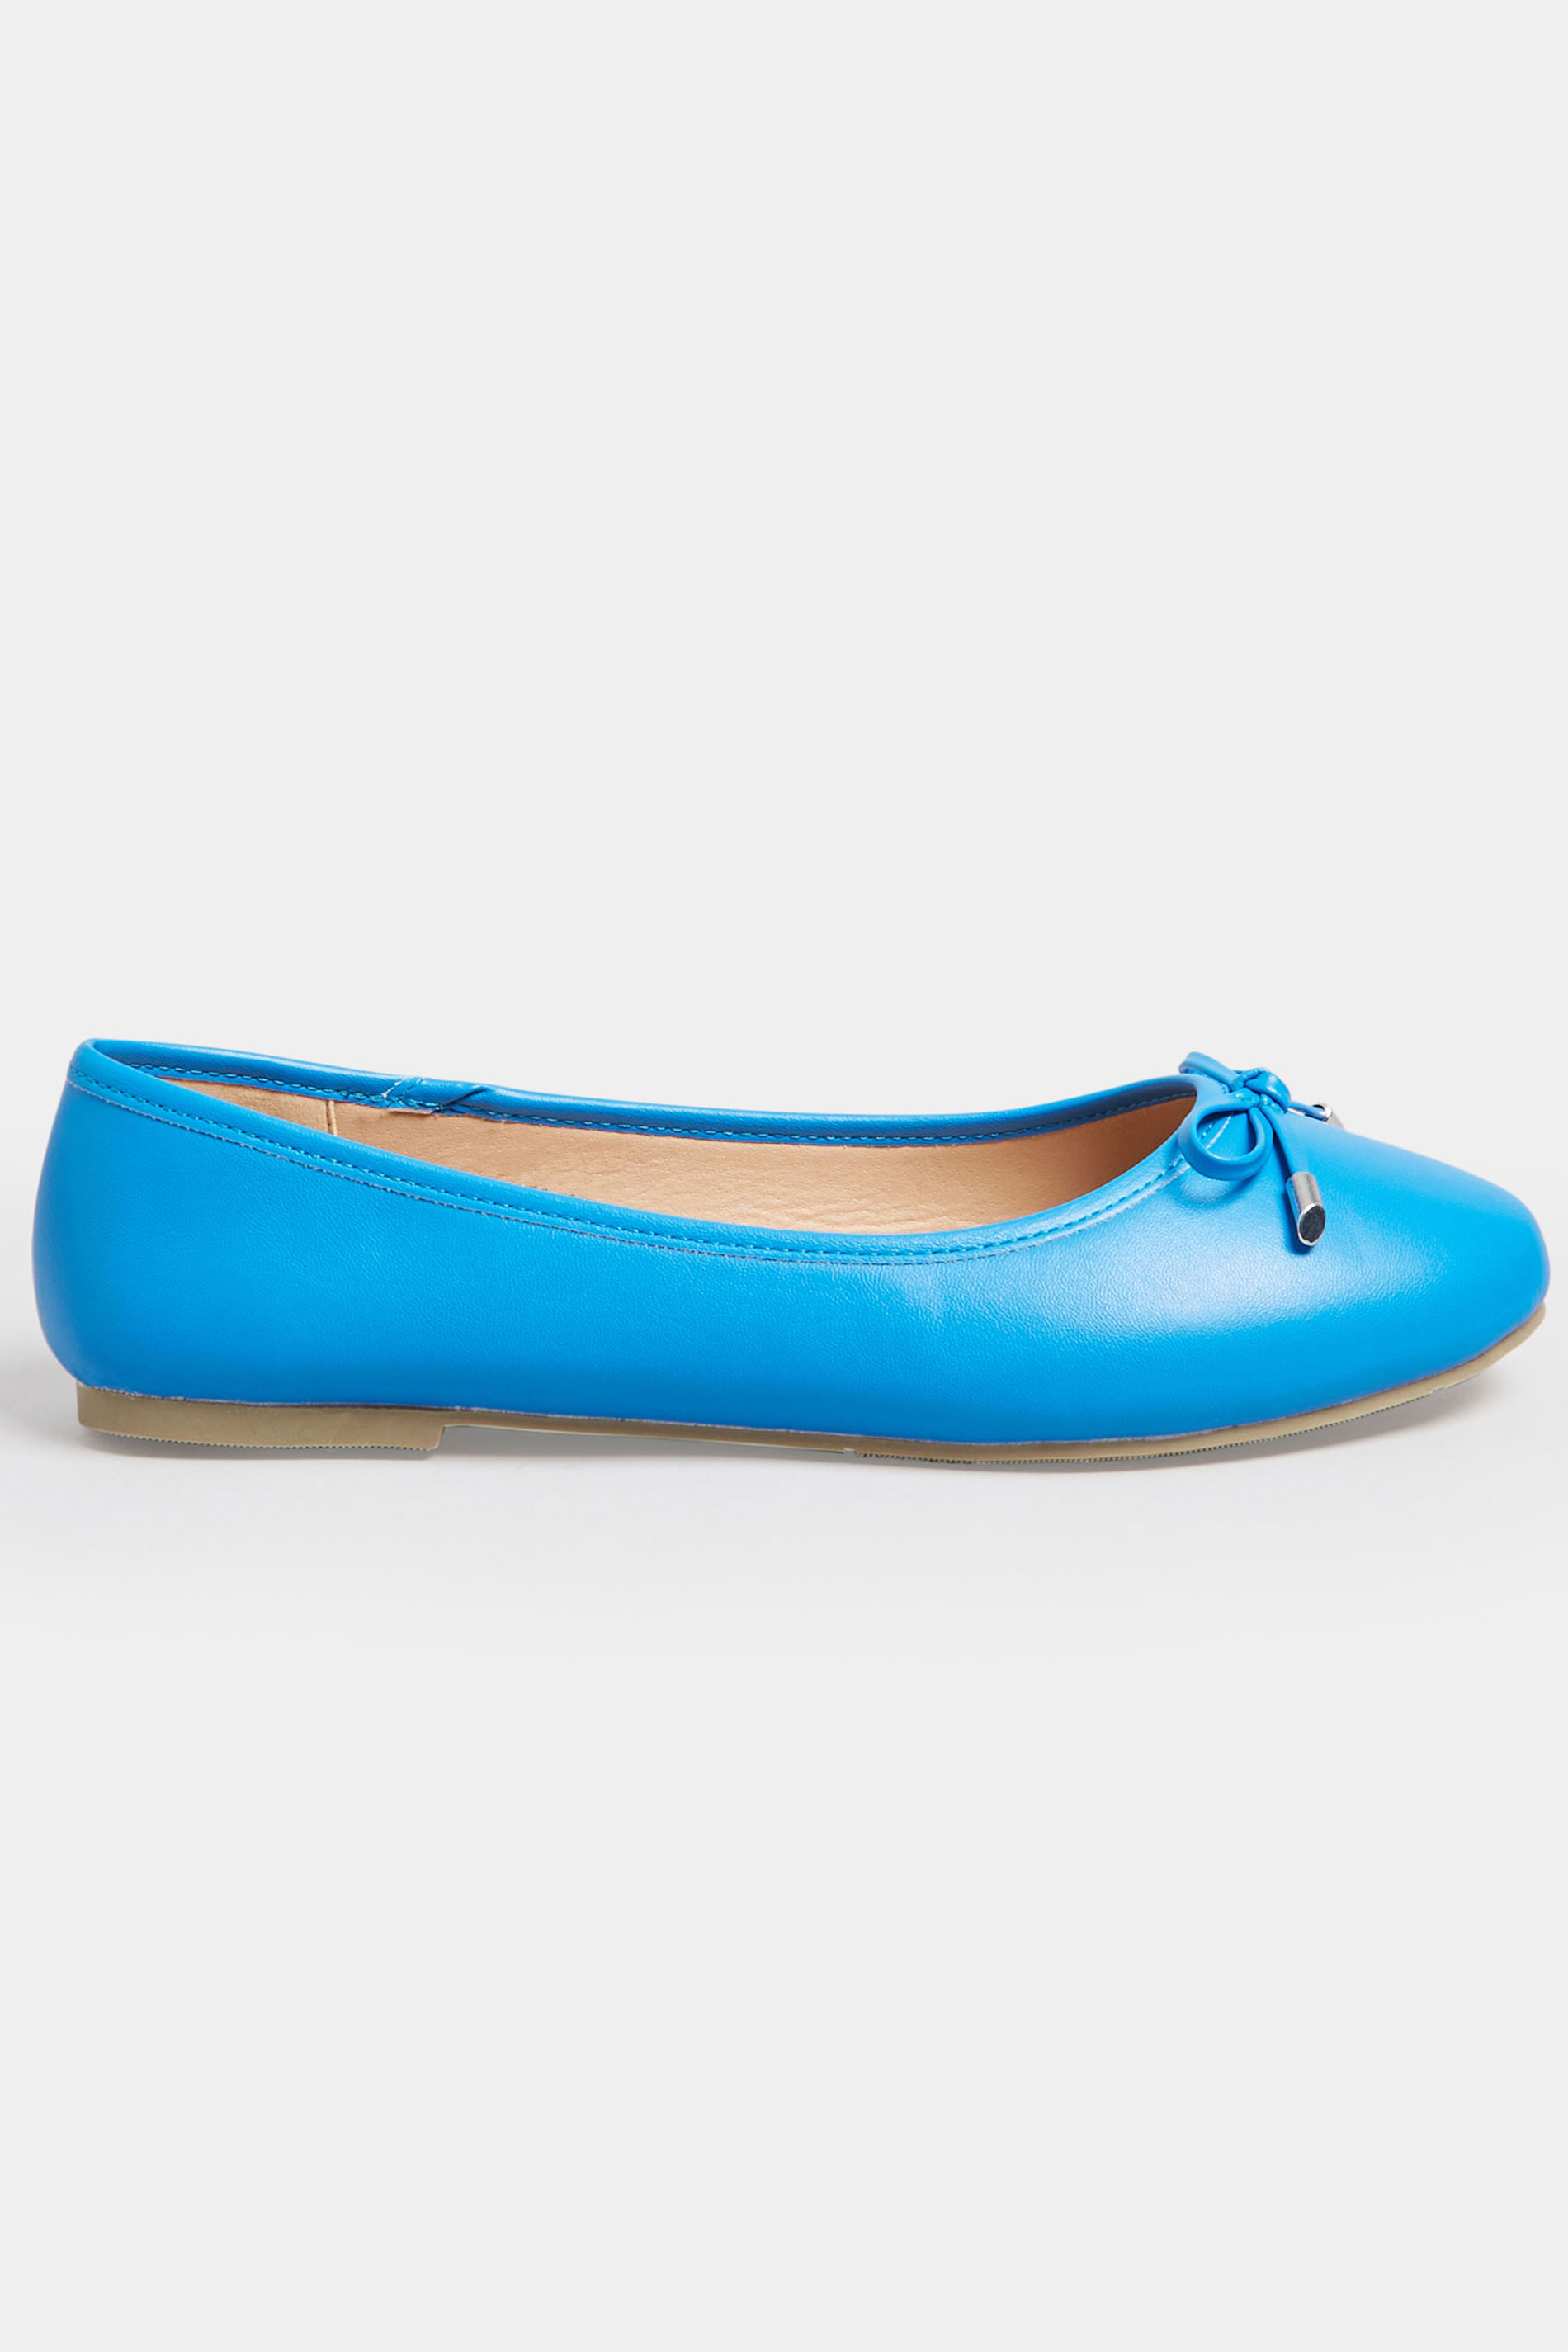 Blue Ballerina Pumps In Wide E Fit & Extra Wide EEE Fit | Yours Clothing